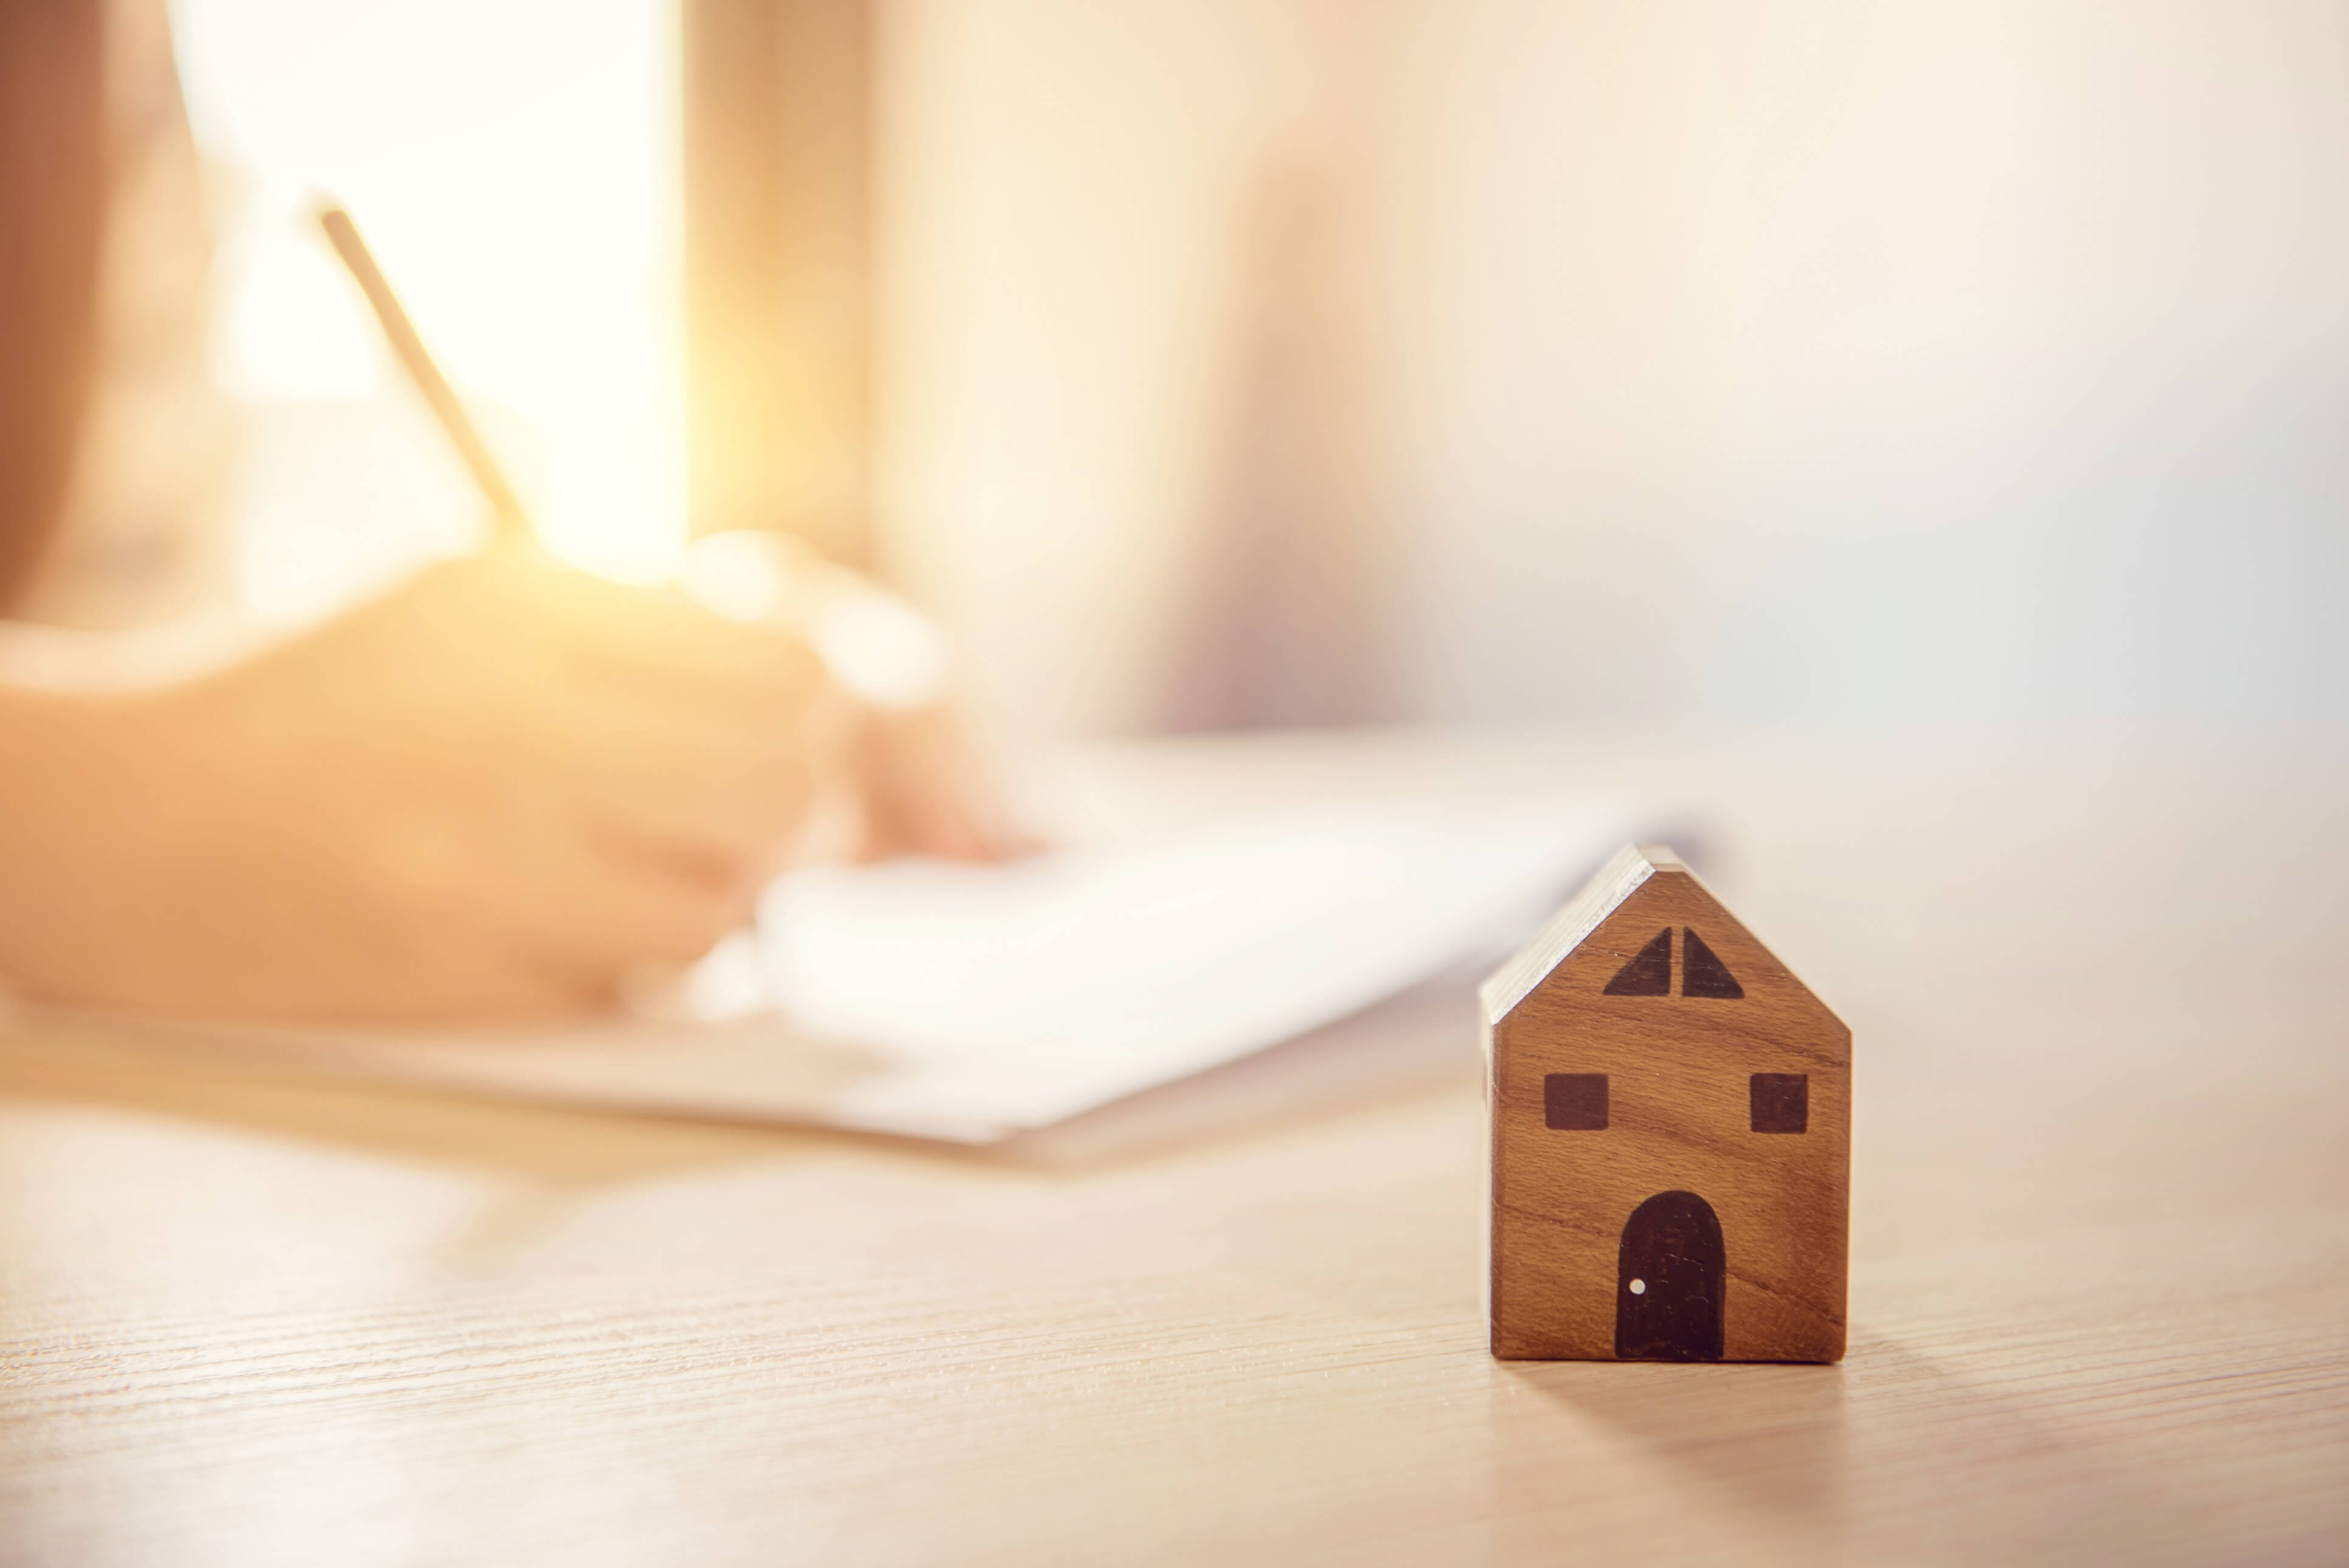 What You Need to Know about Mortgage Renewals After Consumer Proposals